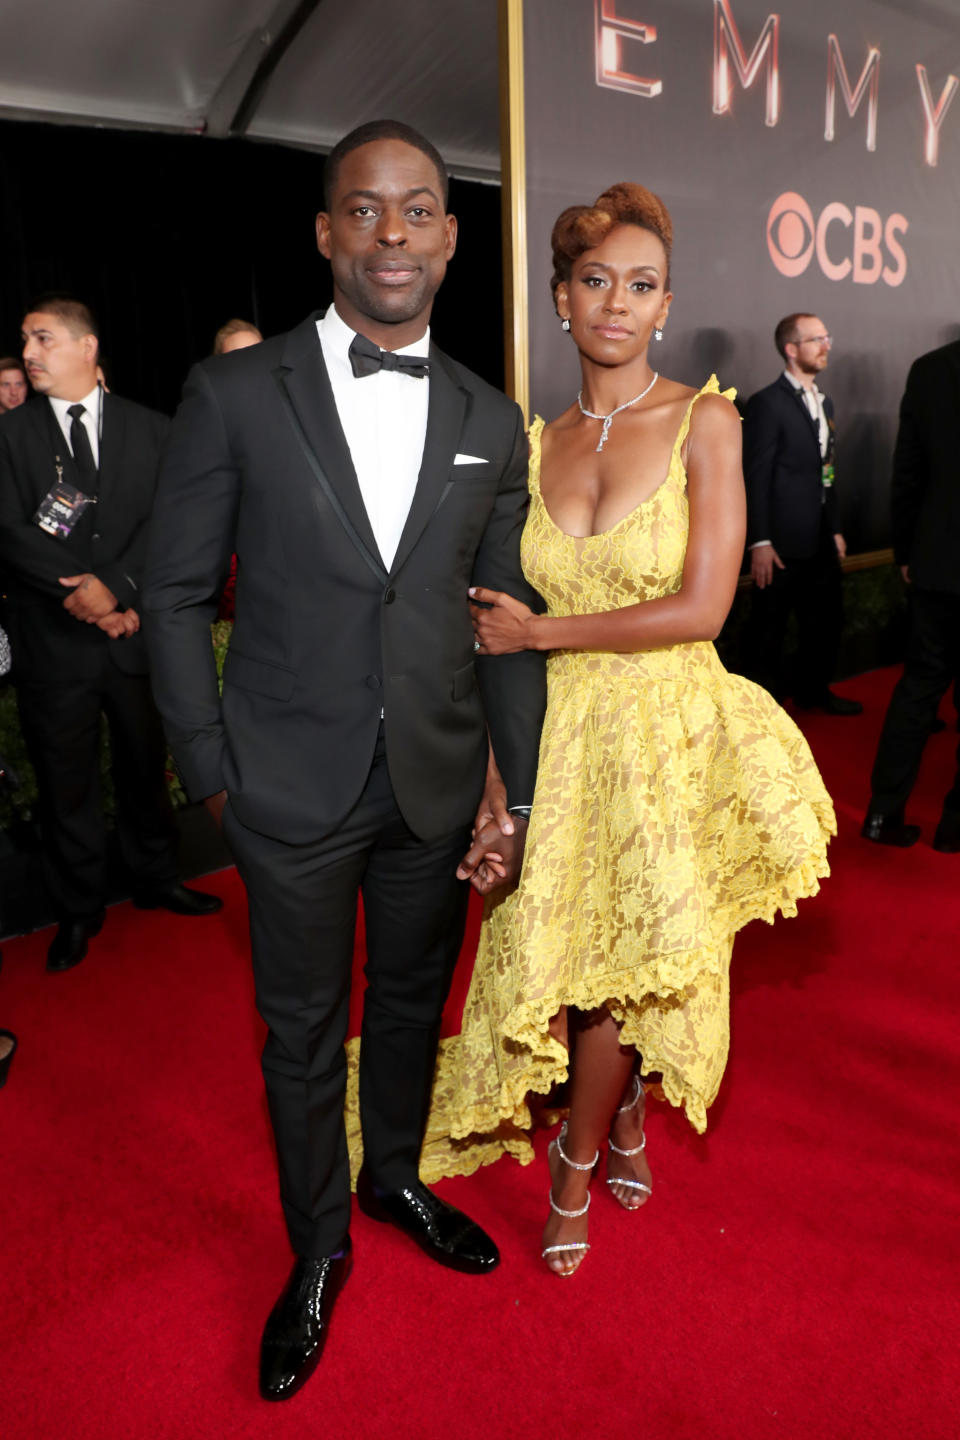 LOS ANGELES, CA - SEPTEMBER 17: Actors Sterling K. Brown (L) and Ryan Michelle Bathe walk the red carpet during the 69th Annual Primetime Emmy Awards at Microsoft Theater on September 17, 2017 in Los Angeles, California. (Photo by Rich Polk/Getty Images for IMDb)